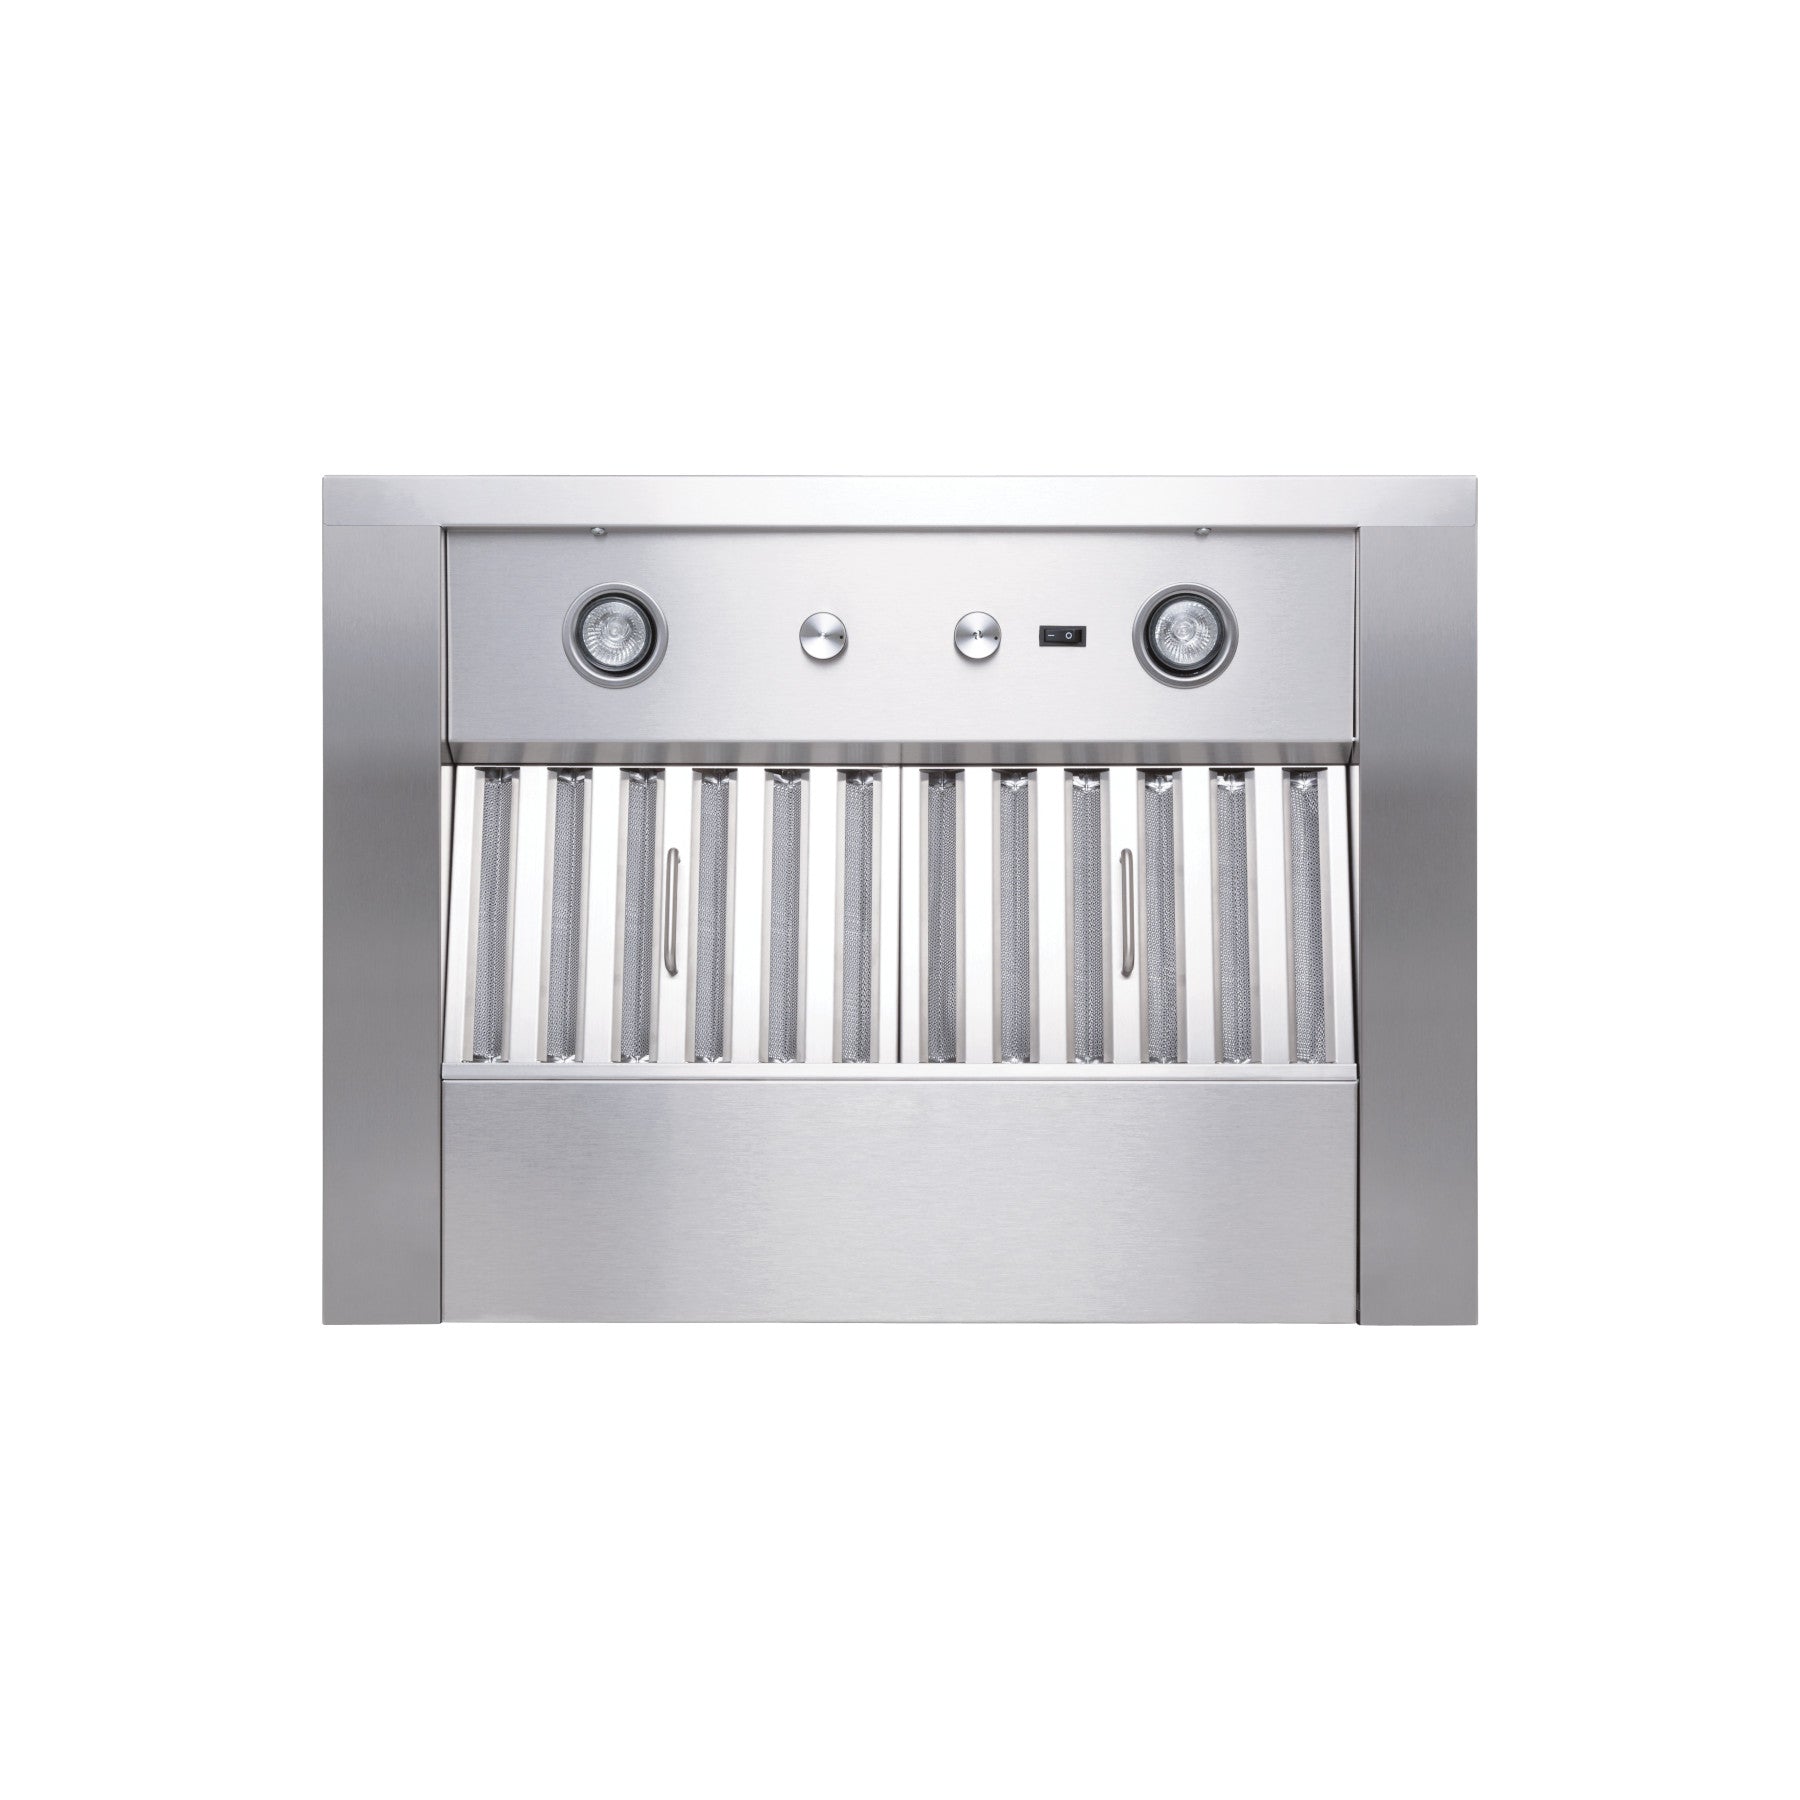 Best - 48 Inch Under Cabinet Range Vent in Stainless - UP26M48SB